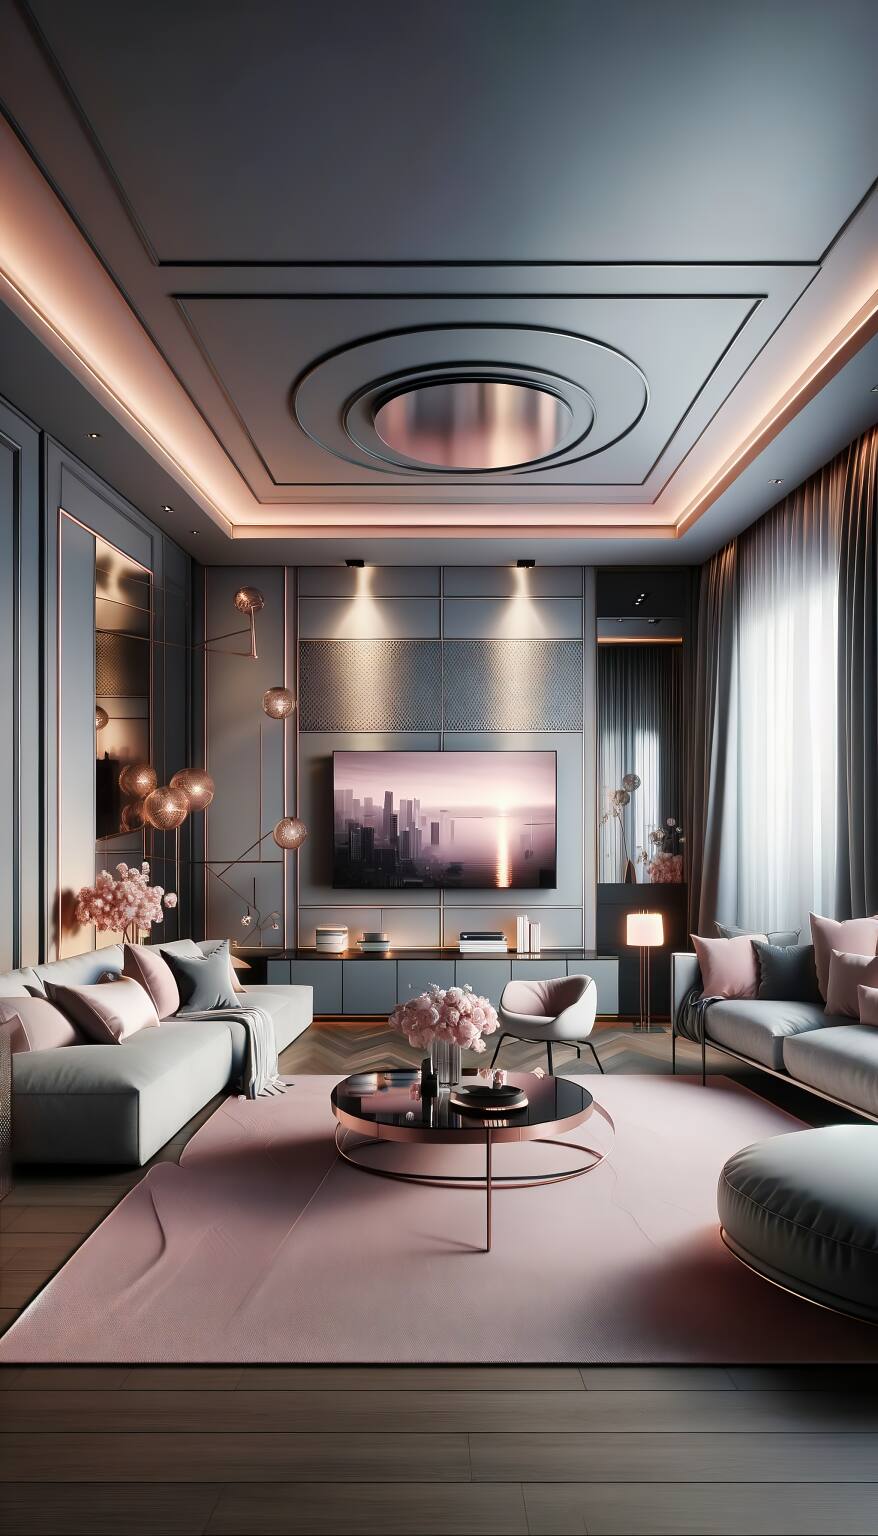 A Contemporary Romantic Living Room In Sleek Grey And Soft Blush, Creating A Chic And Modern Romantic Ambiance.